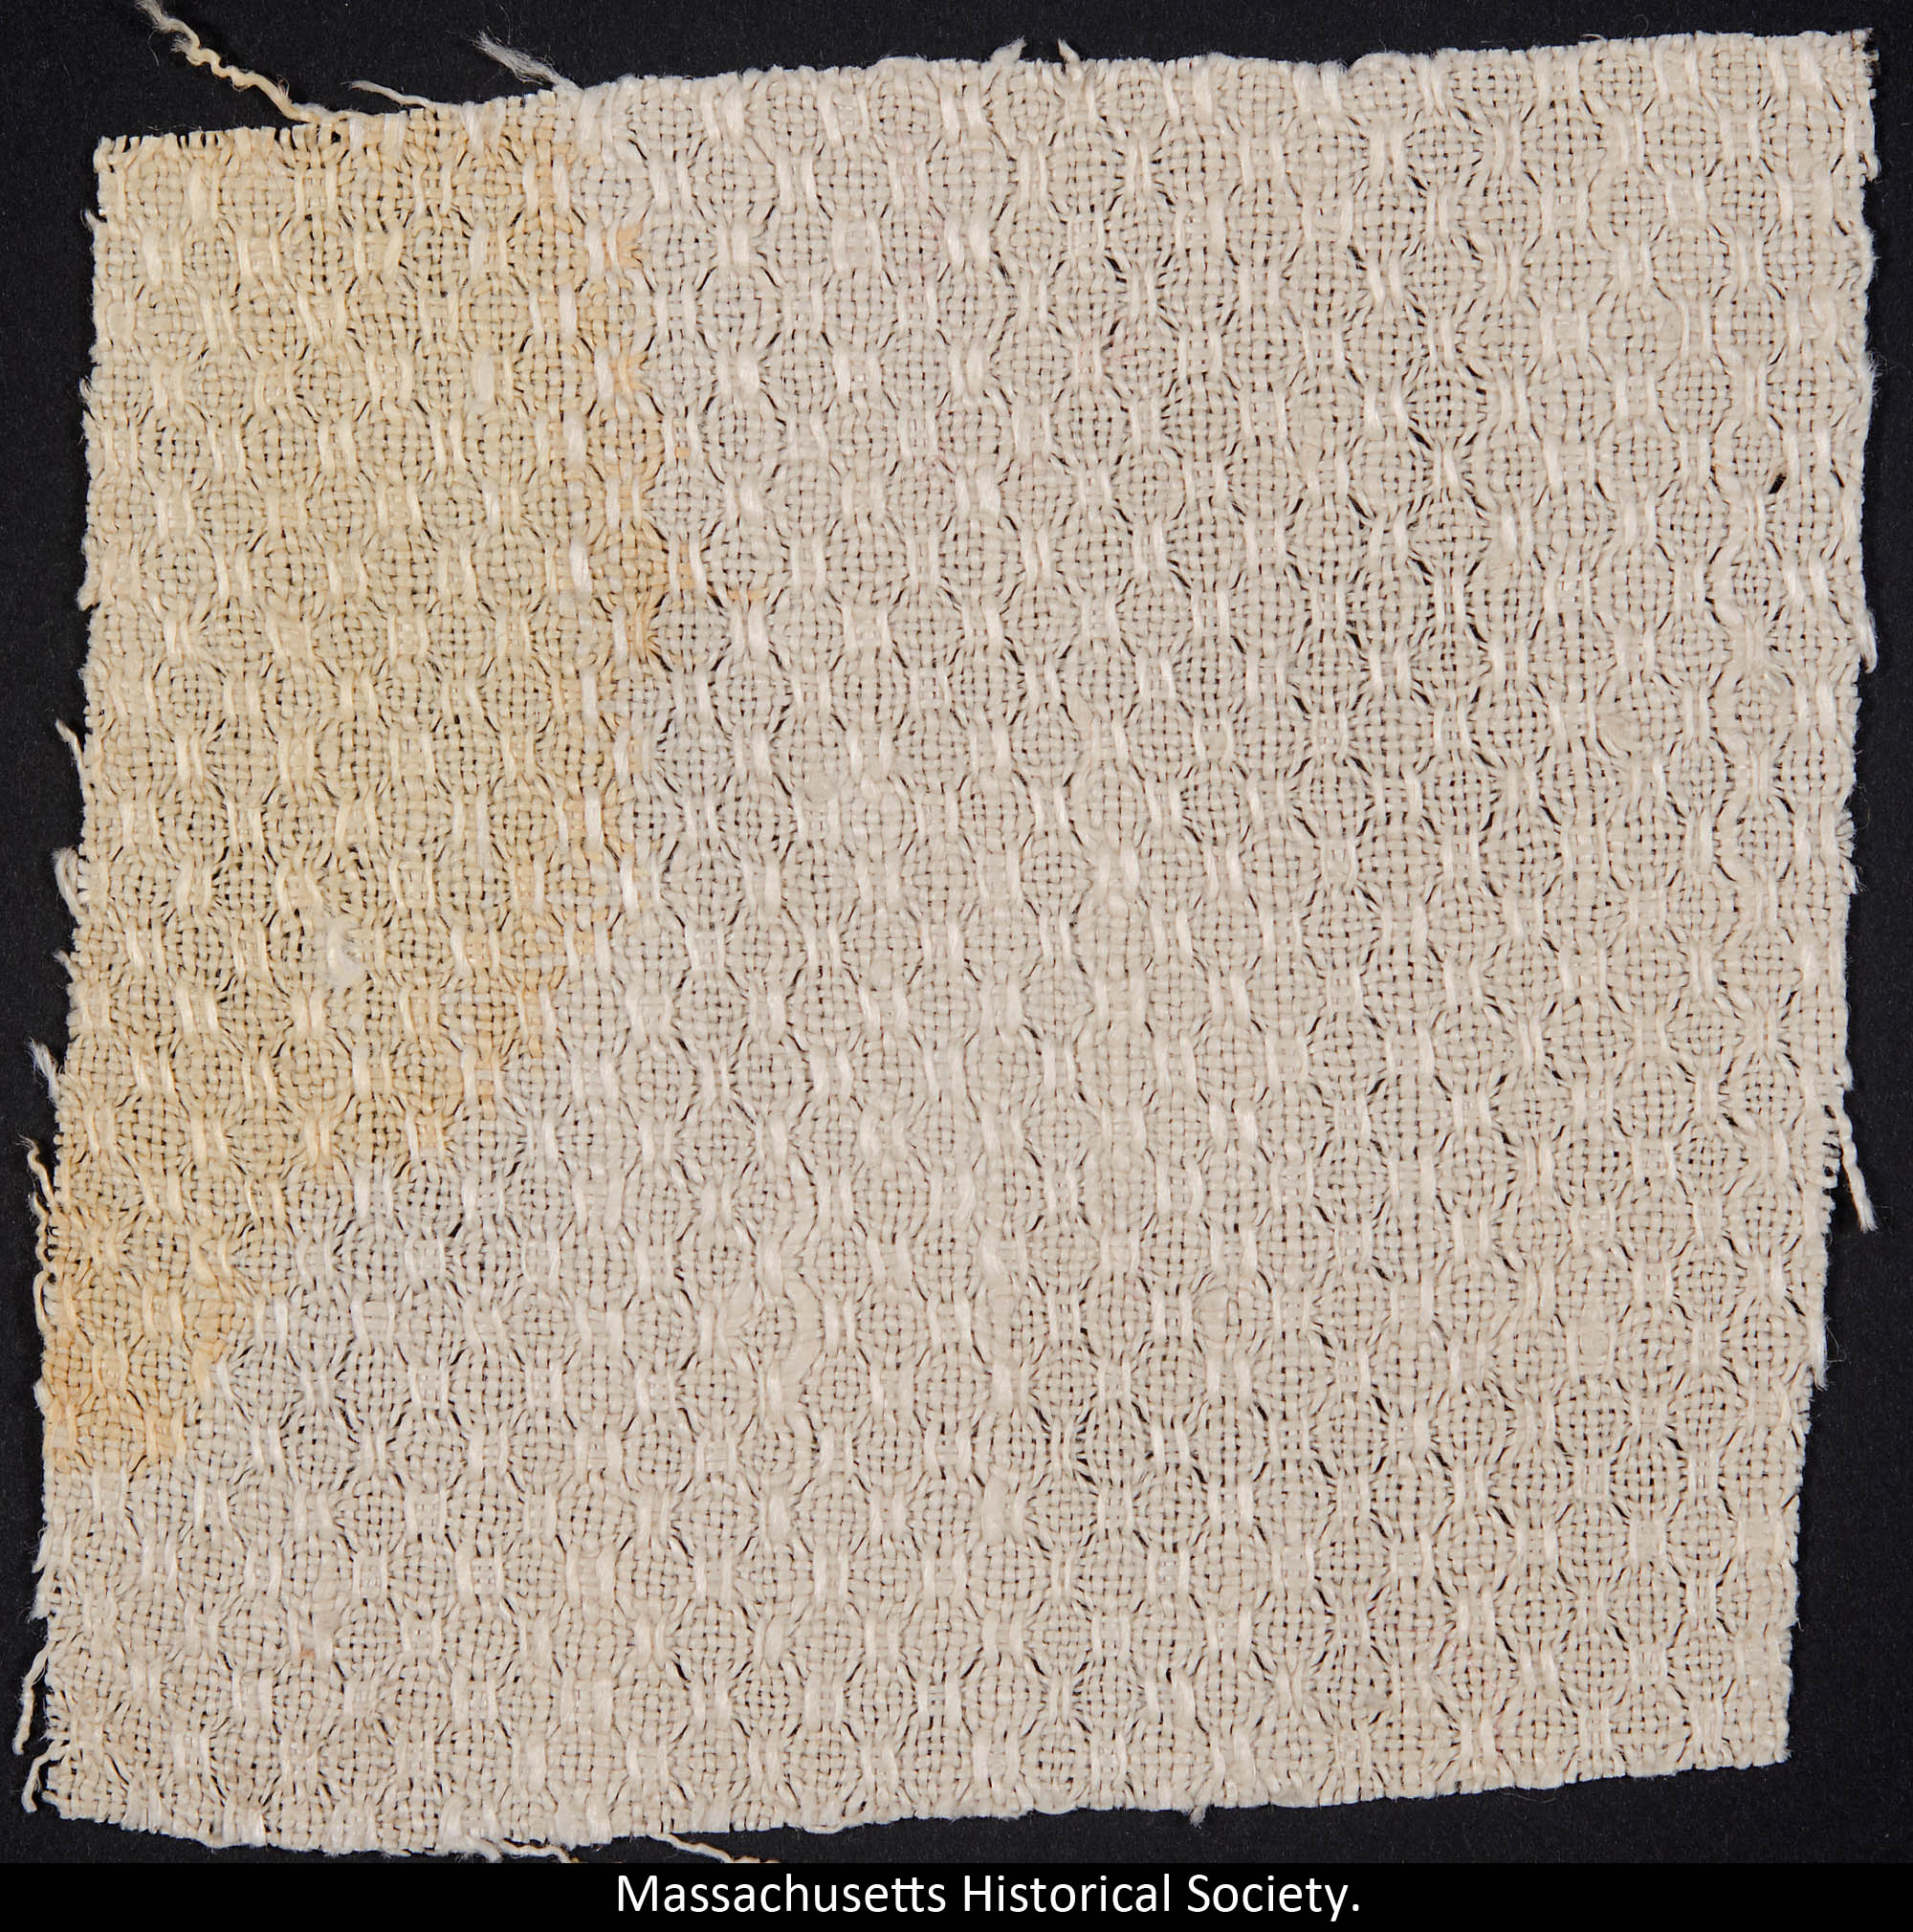 Fragment of towel stained with blood of Abraham Lincoln